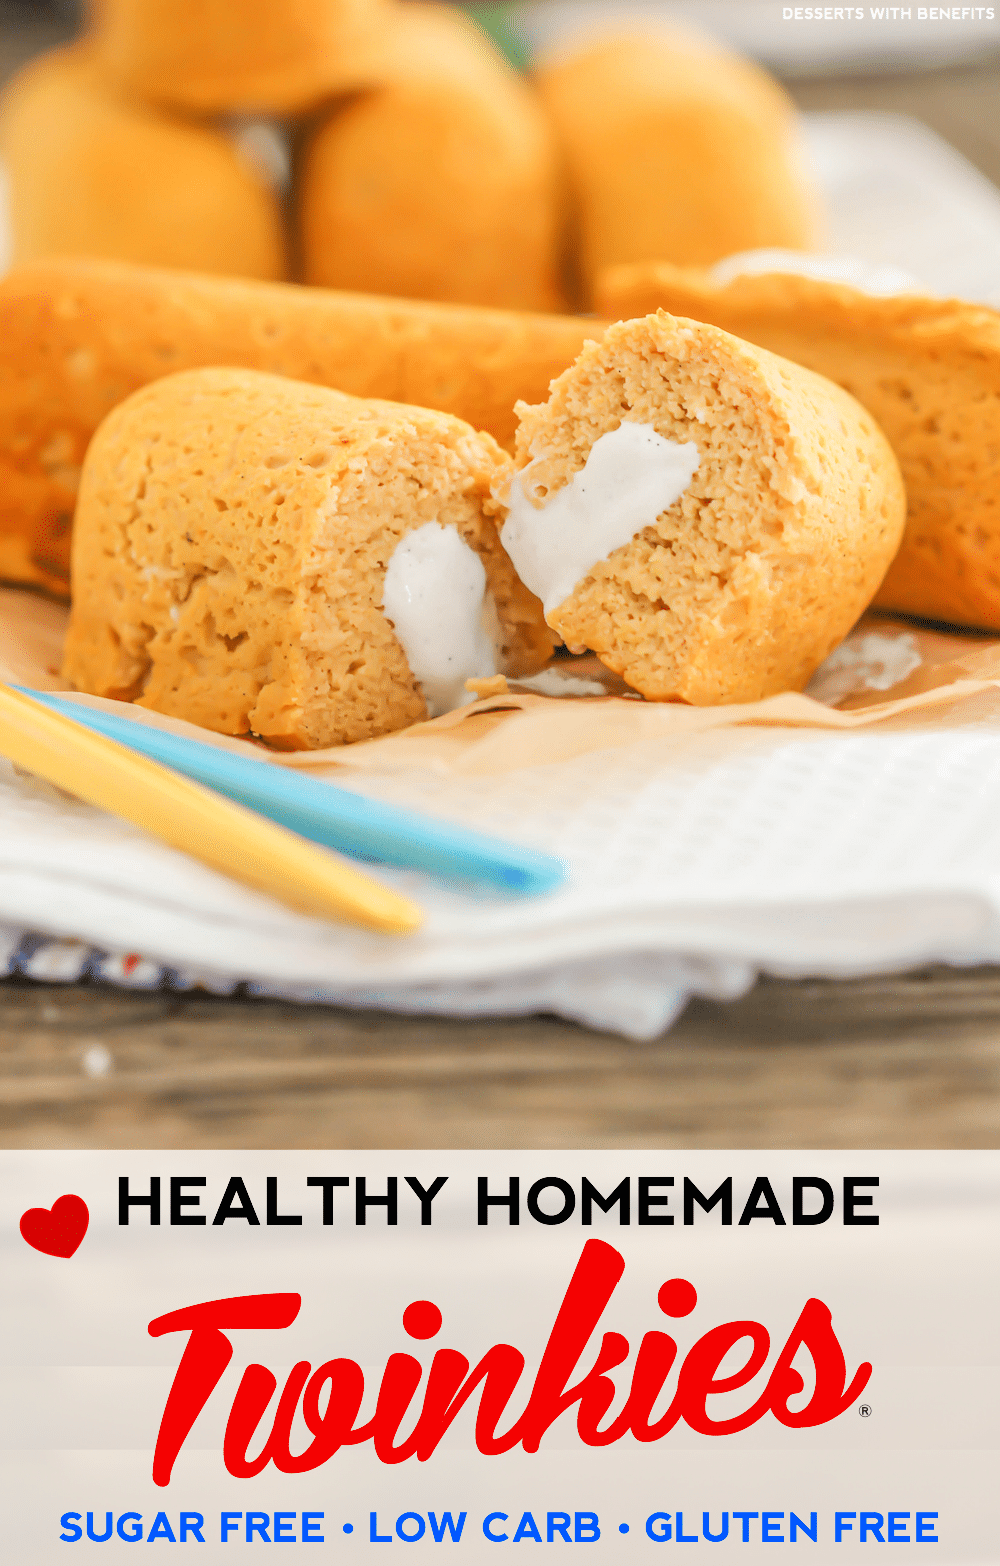 Desserts With Benefits Healthy Homemade Twinkies recipe (sugar free